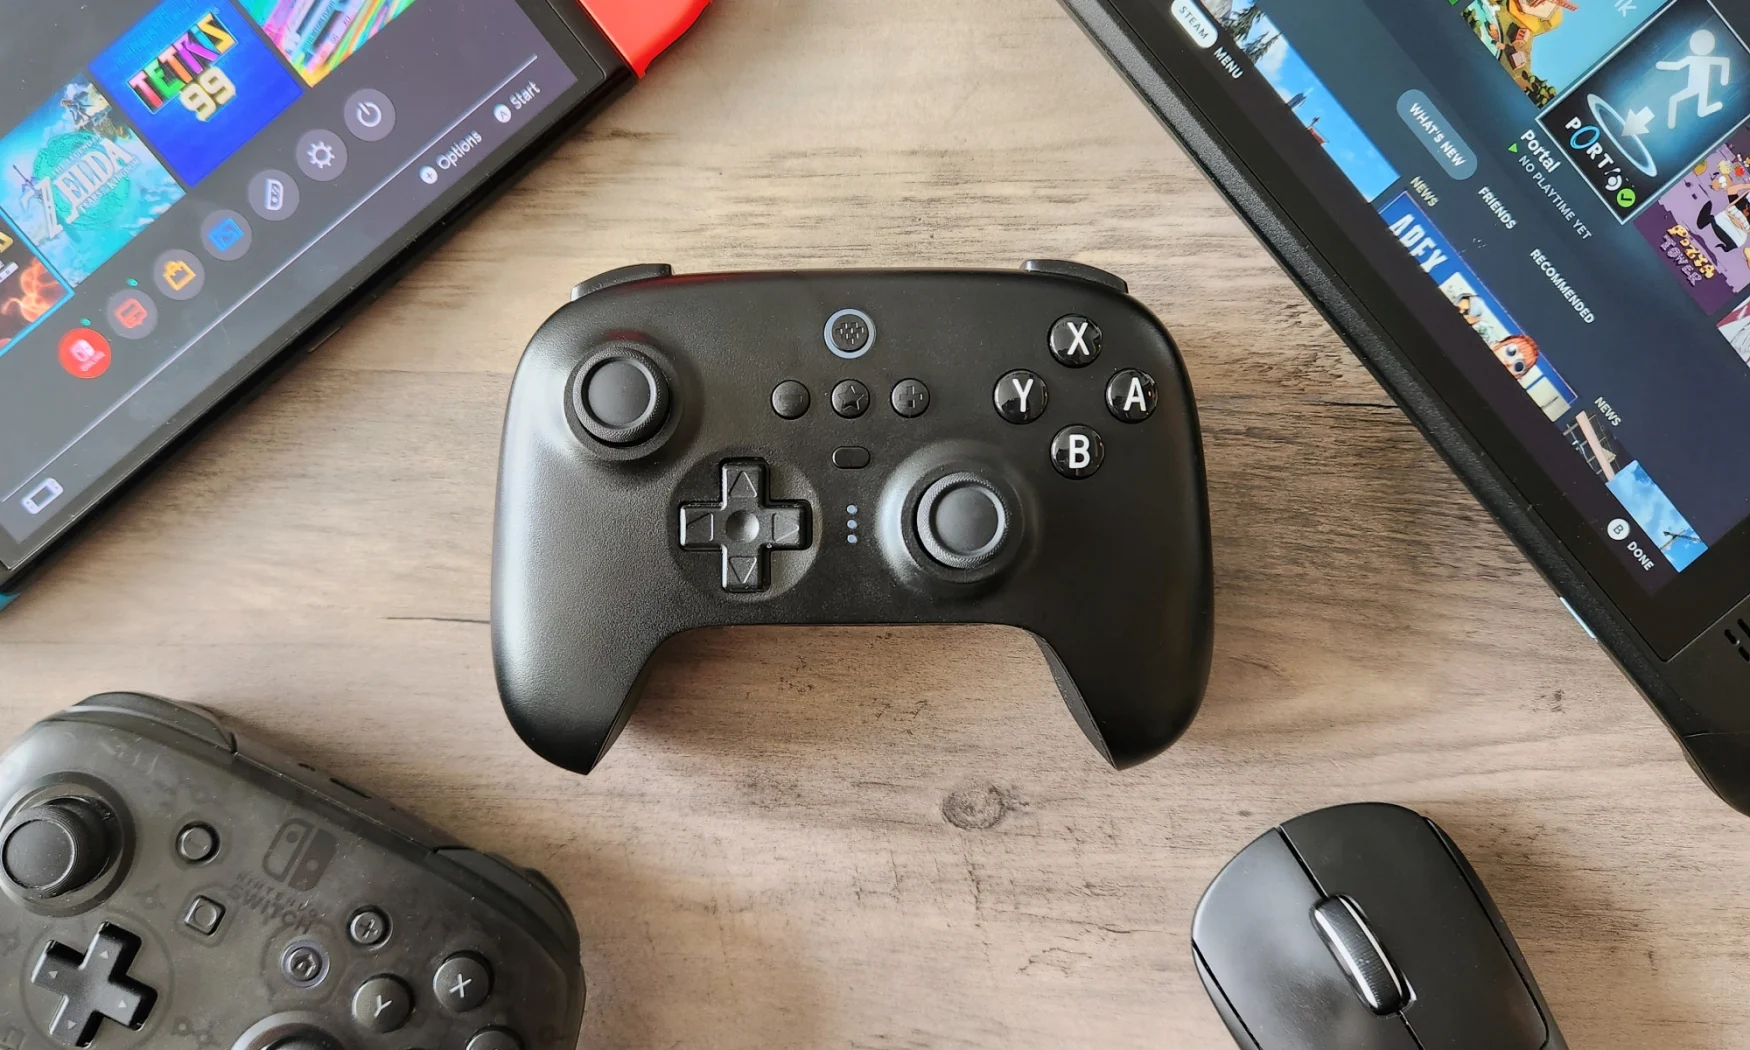 A black video game controller, 8BitDo Ultimate Bluetooth Controller, rests on a wooden table alongside a Nintendo Switch, a Nintendo Switch Pro Controller, a Valve Steam Deck, and a Logitech gaming mouse.